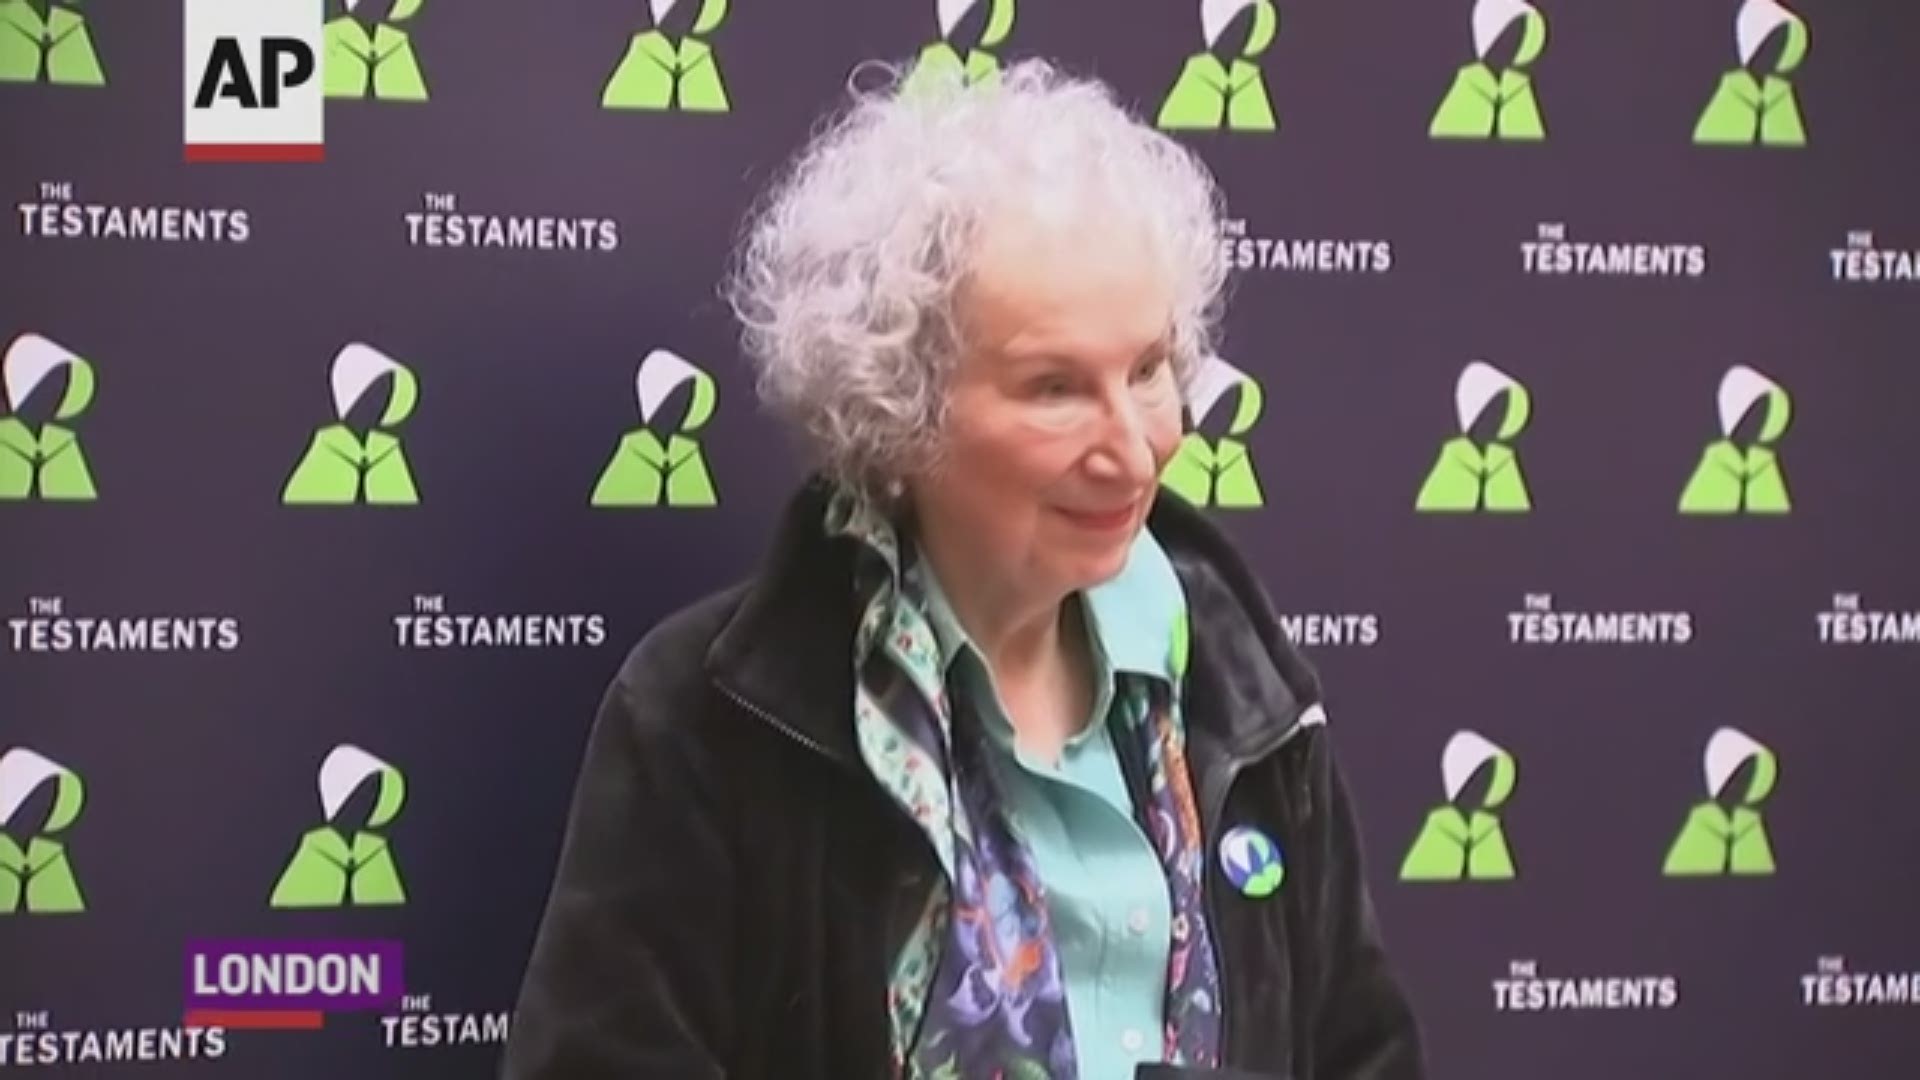 Canadian author Margaret Atwood discusses her new book "The Testaments," a sequel to her best-selling novel "The Handmaid's Tale." (AP)